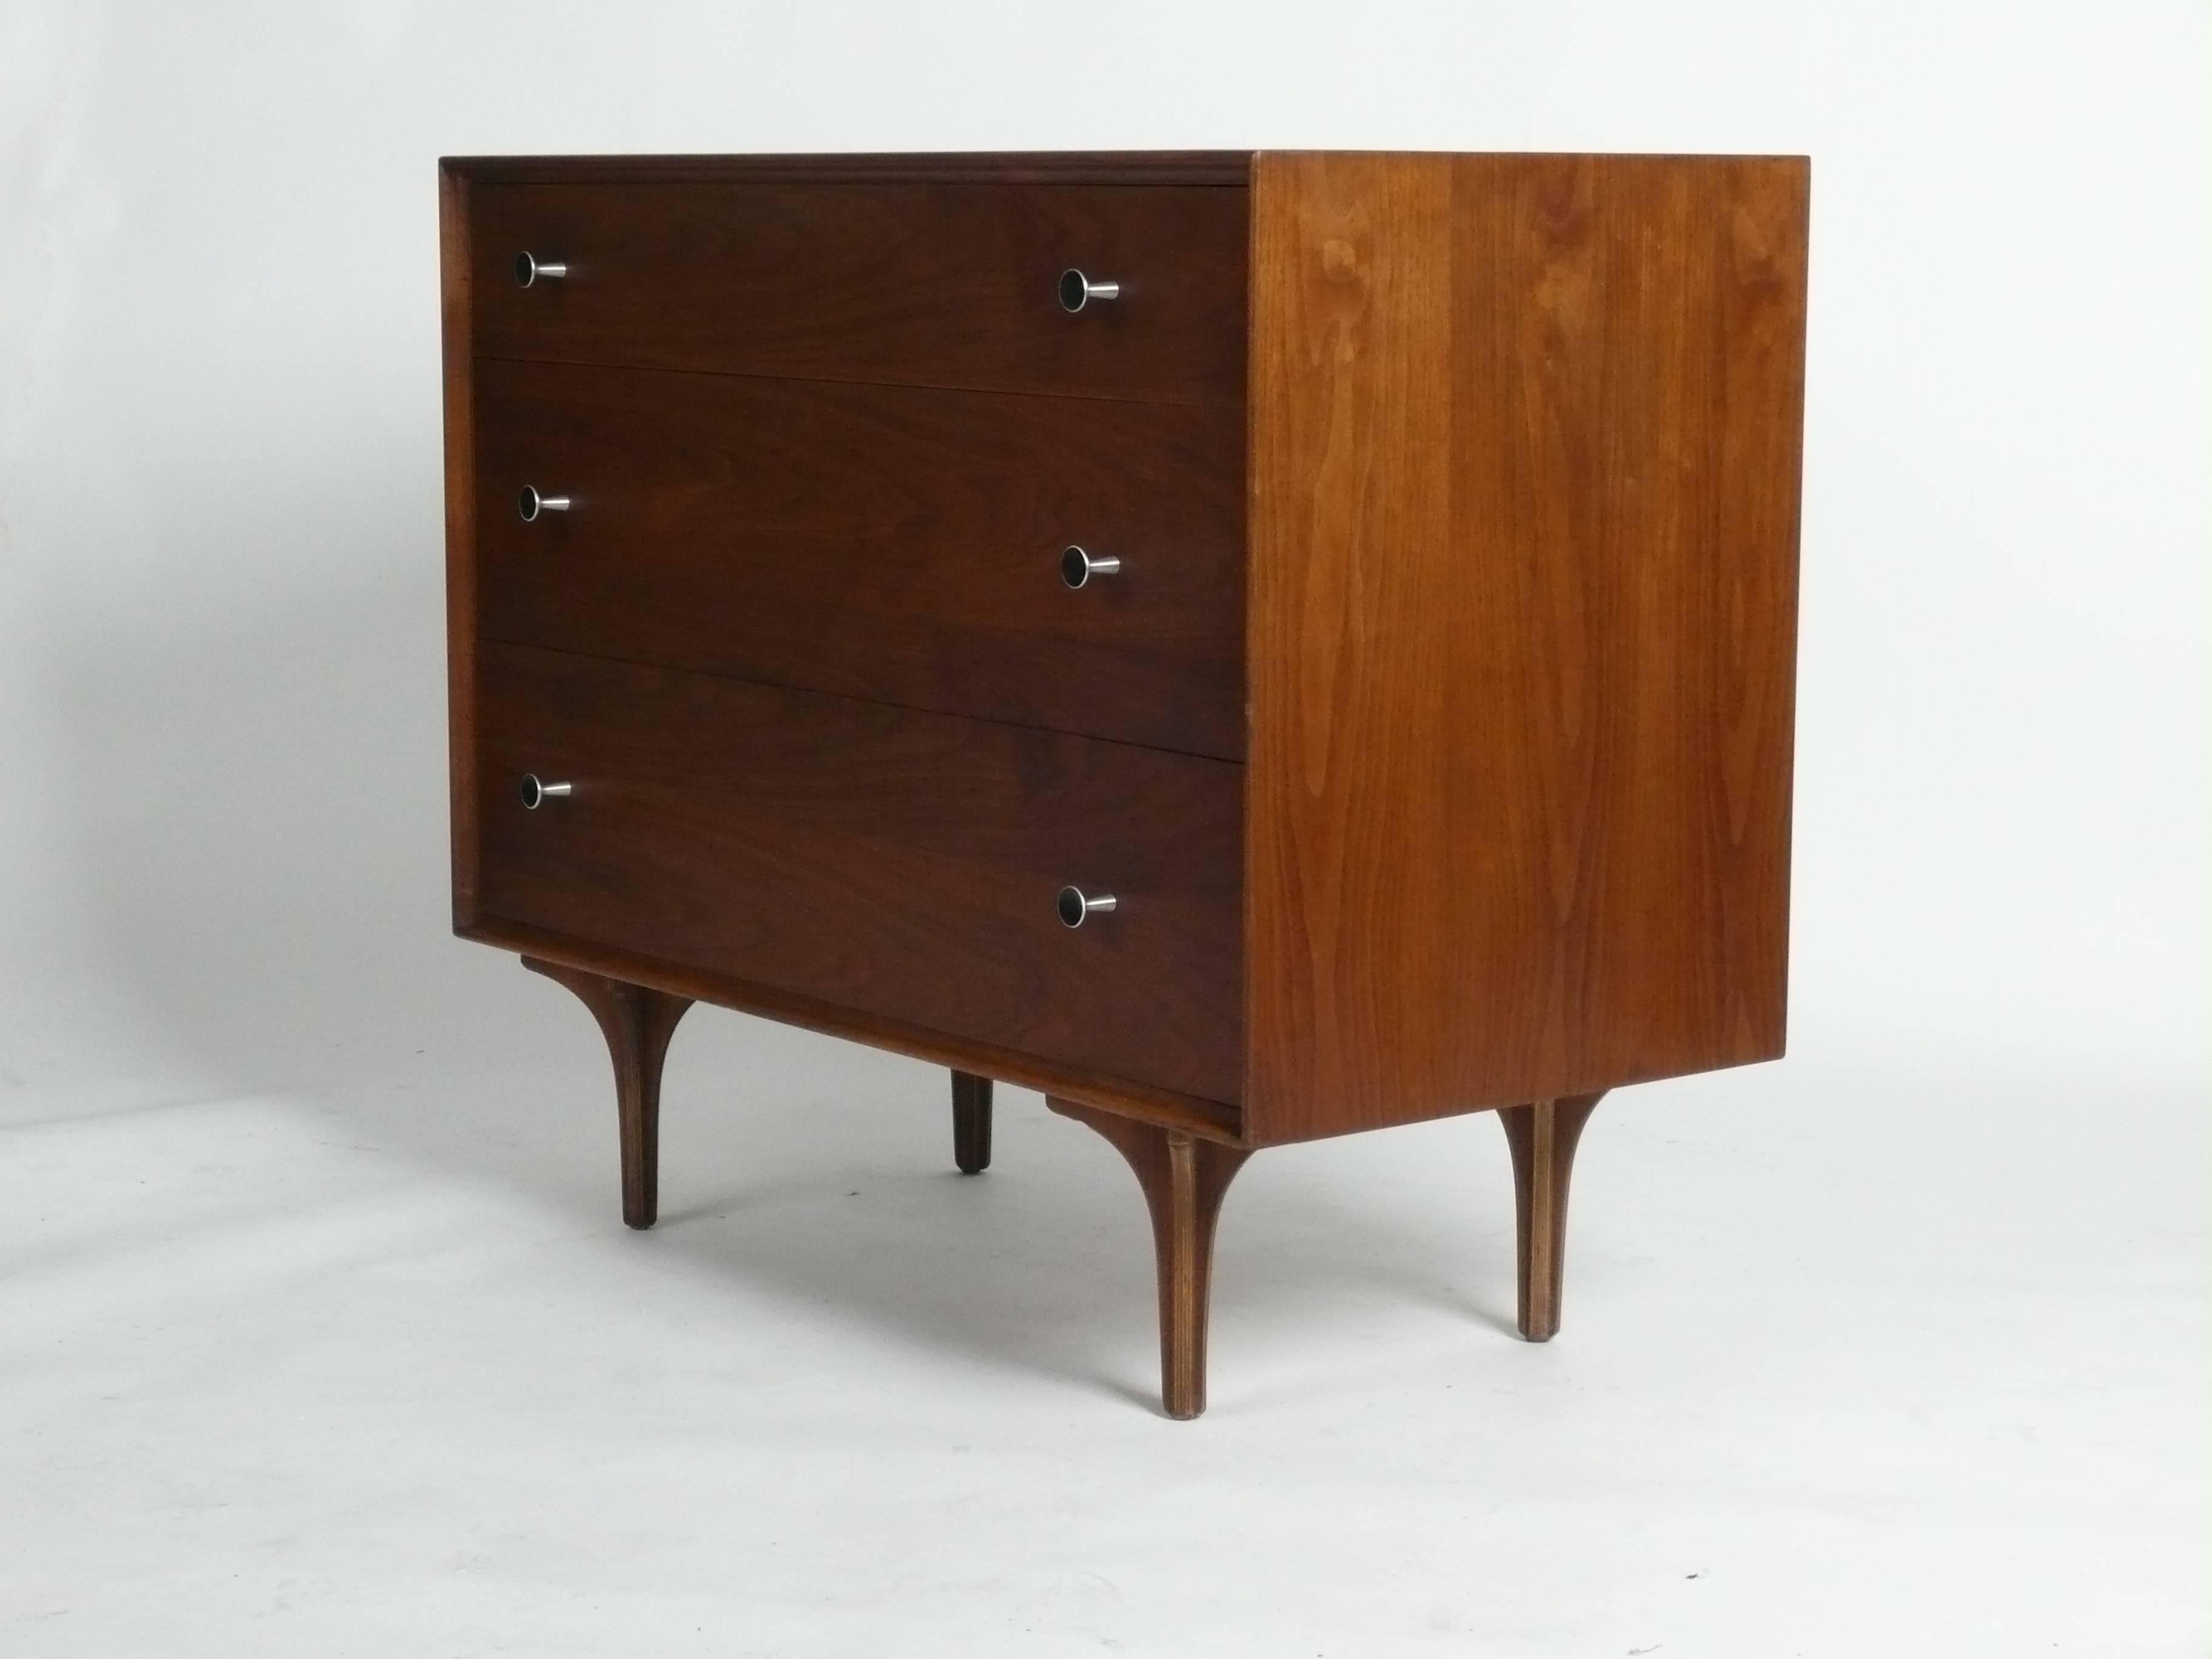 Early 1960s, oiled walnut, 3-drawer chest designed by Milo Baughman for Glenn of California.  Unique silver pulls and sculptural feet make this piece.
 